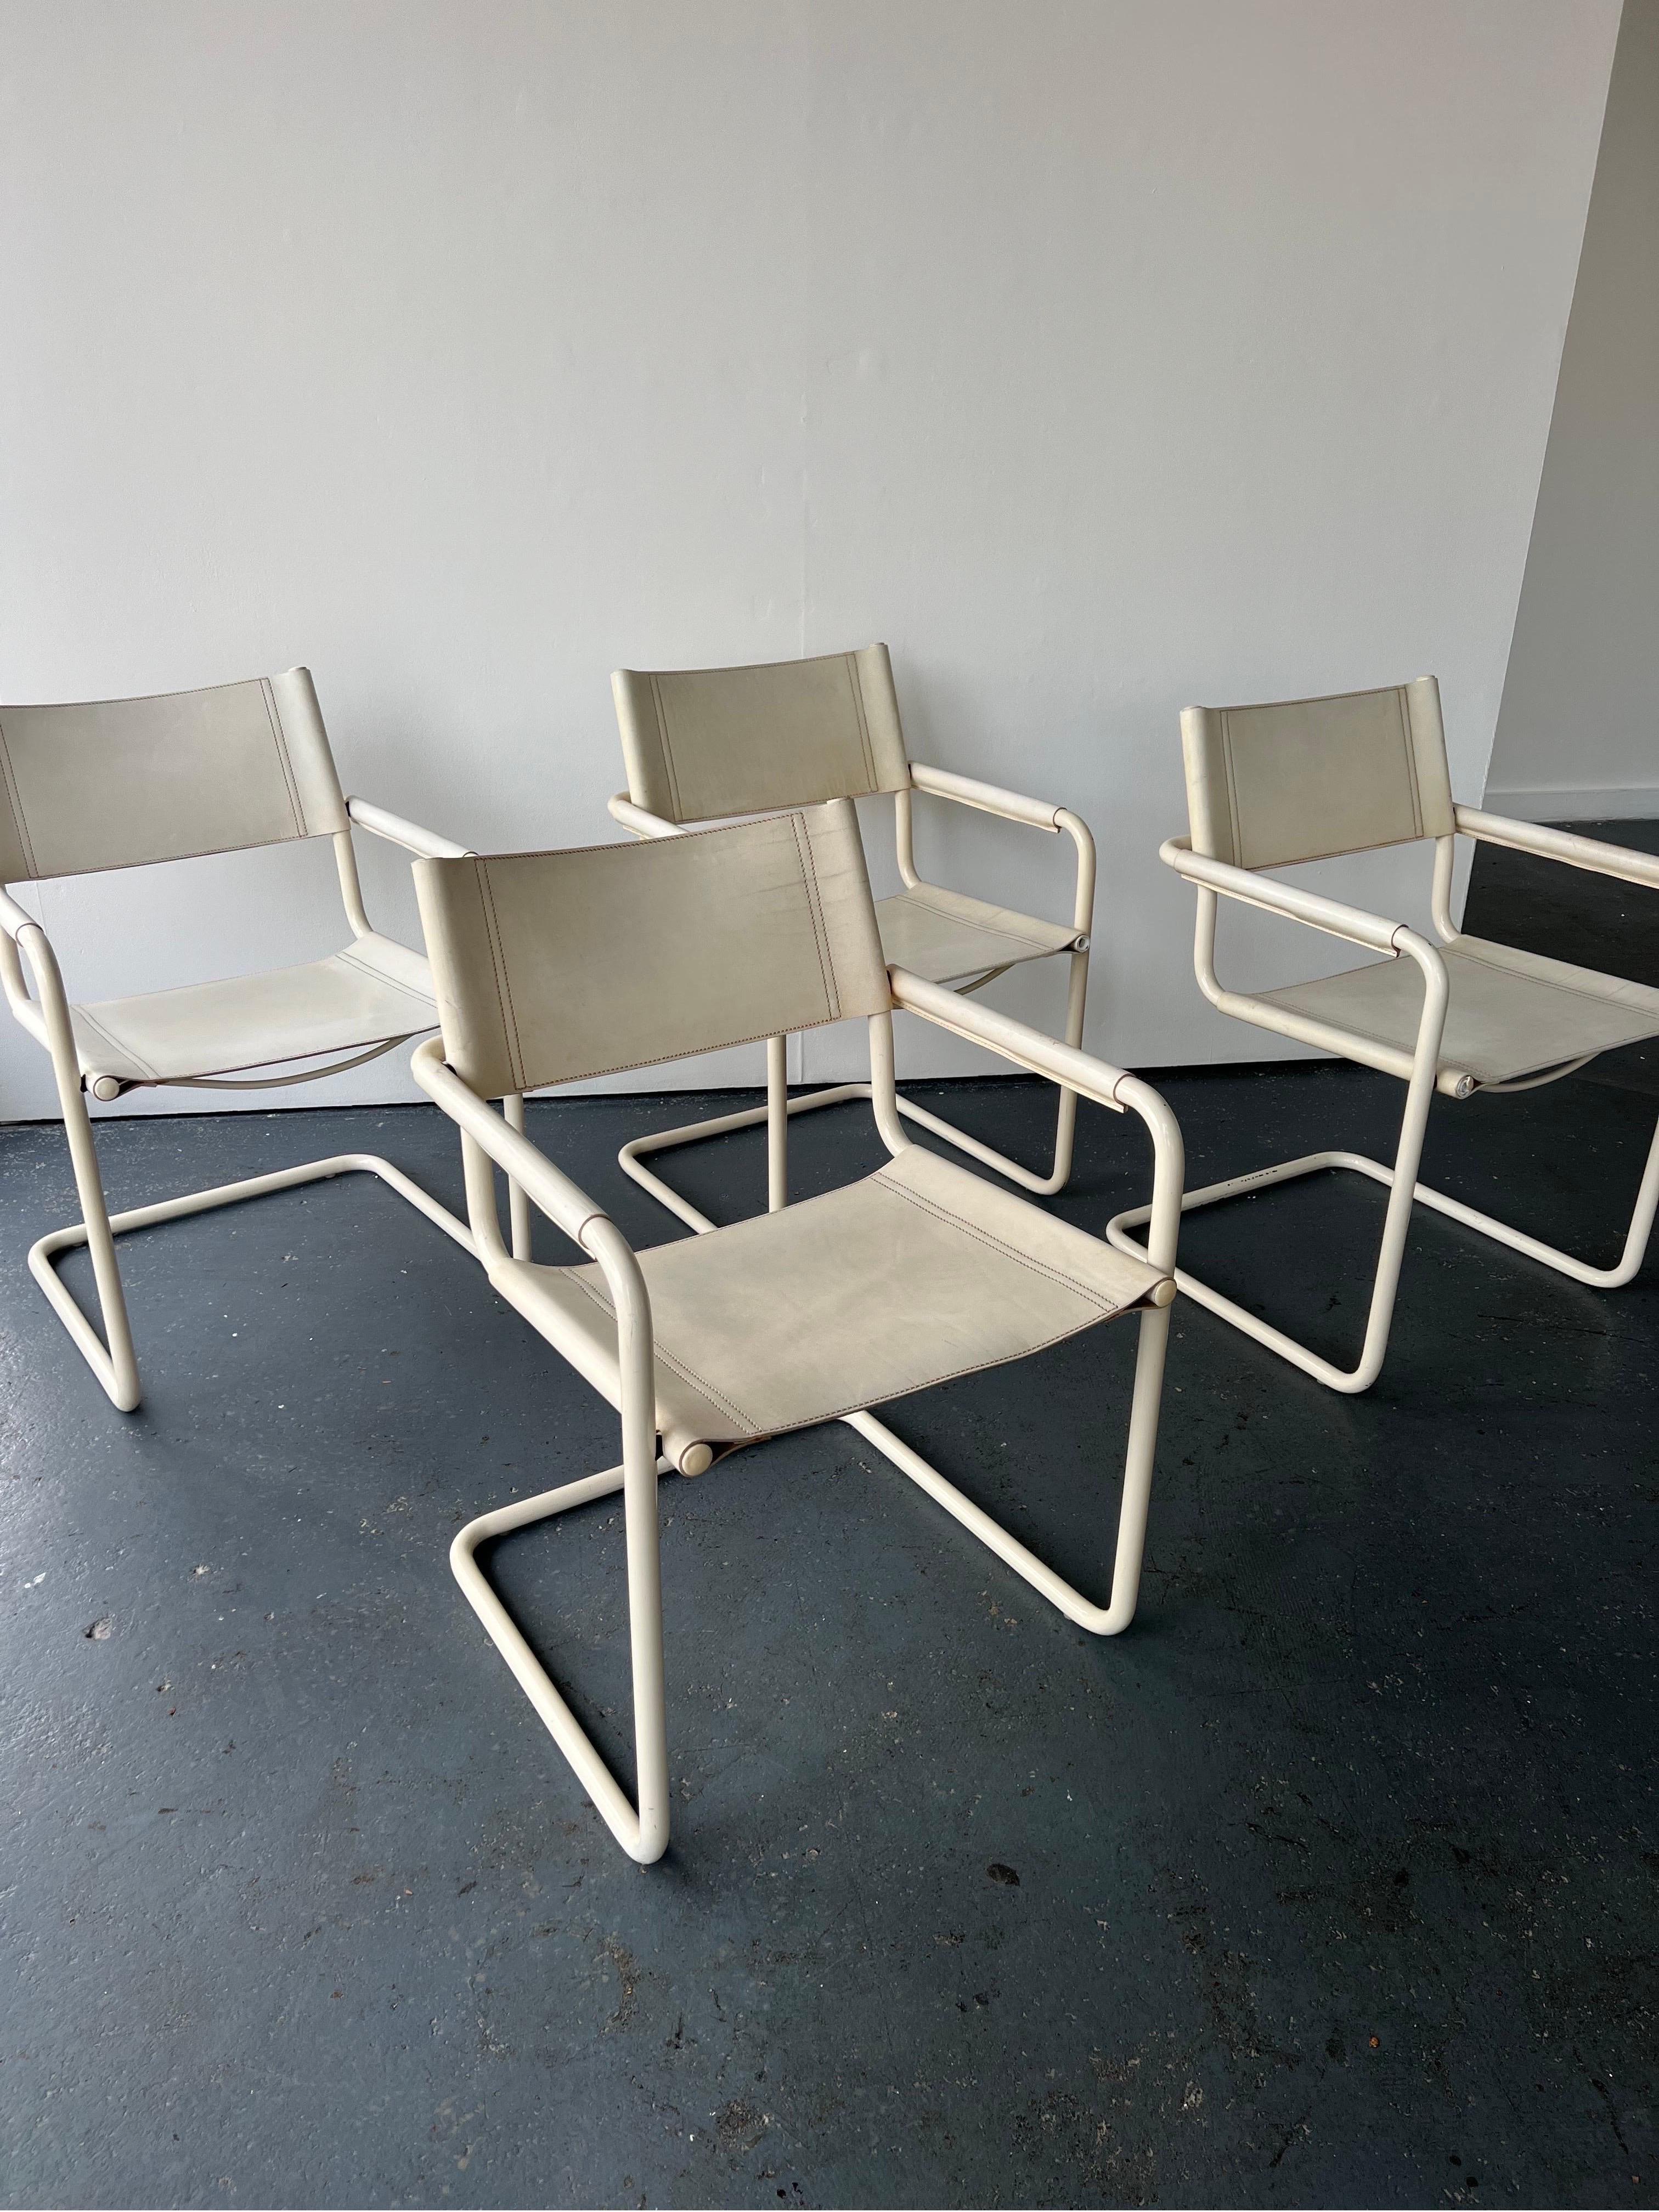 Set of x4 Cantilevered MG5 Dining Chairs Designed by Marcel Breuer Made by Matteo Grassi

Stunning set of four Breuer designed dining chairs in white leather with tubular white metal cantilevered frames. These classic 1970's version of the iconic